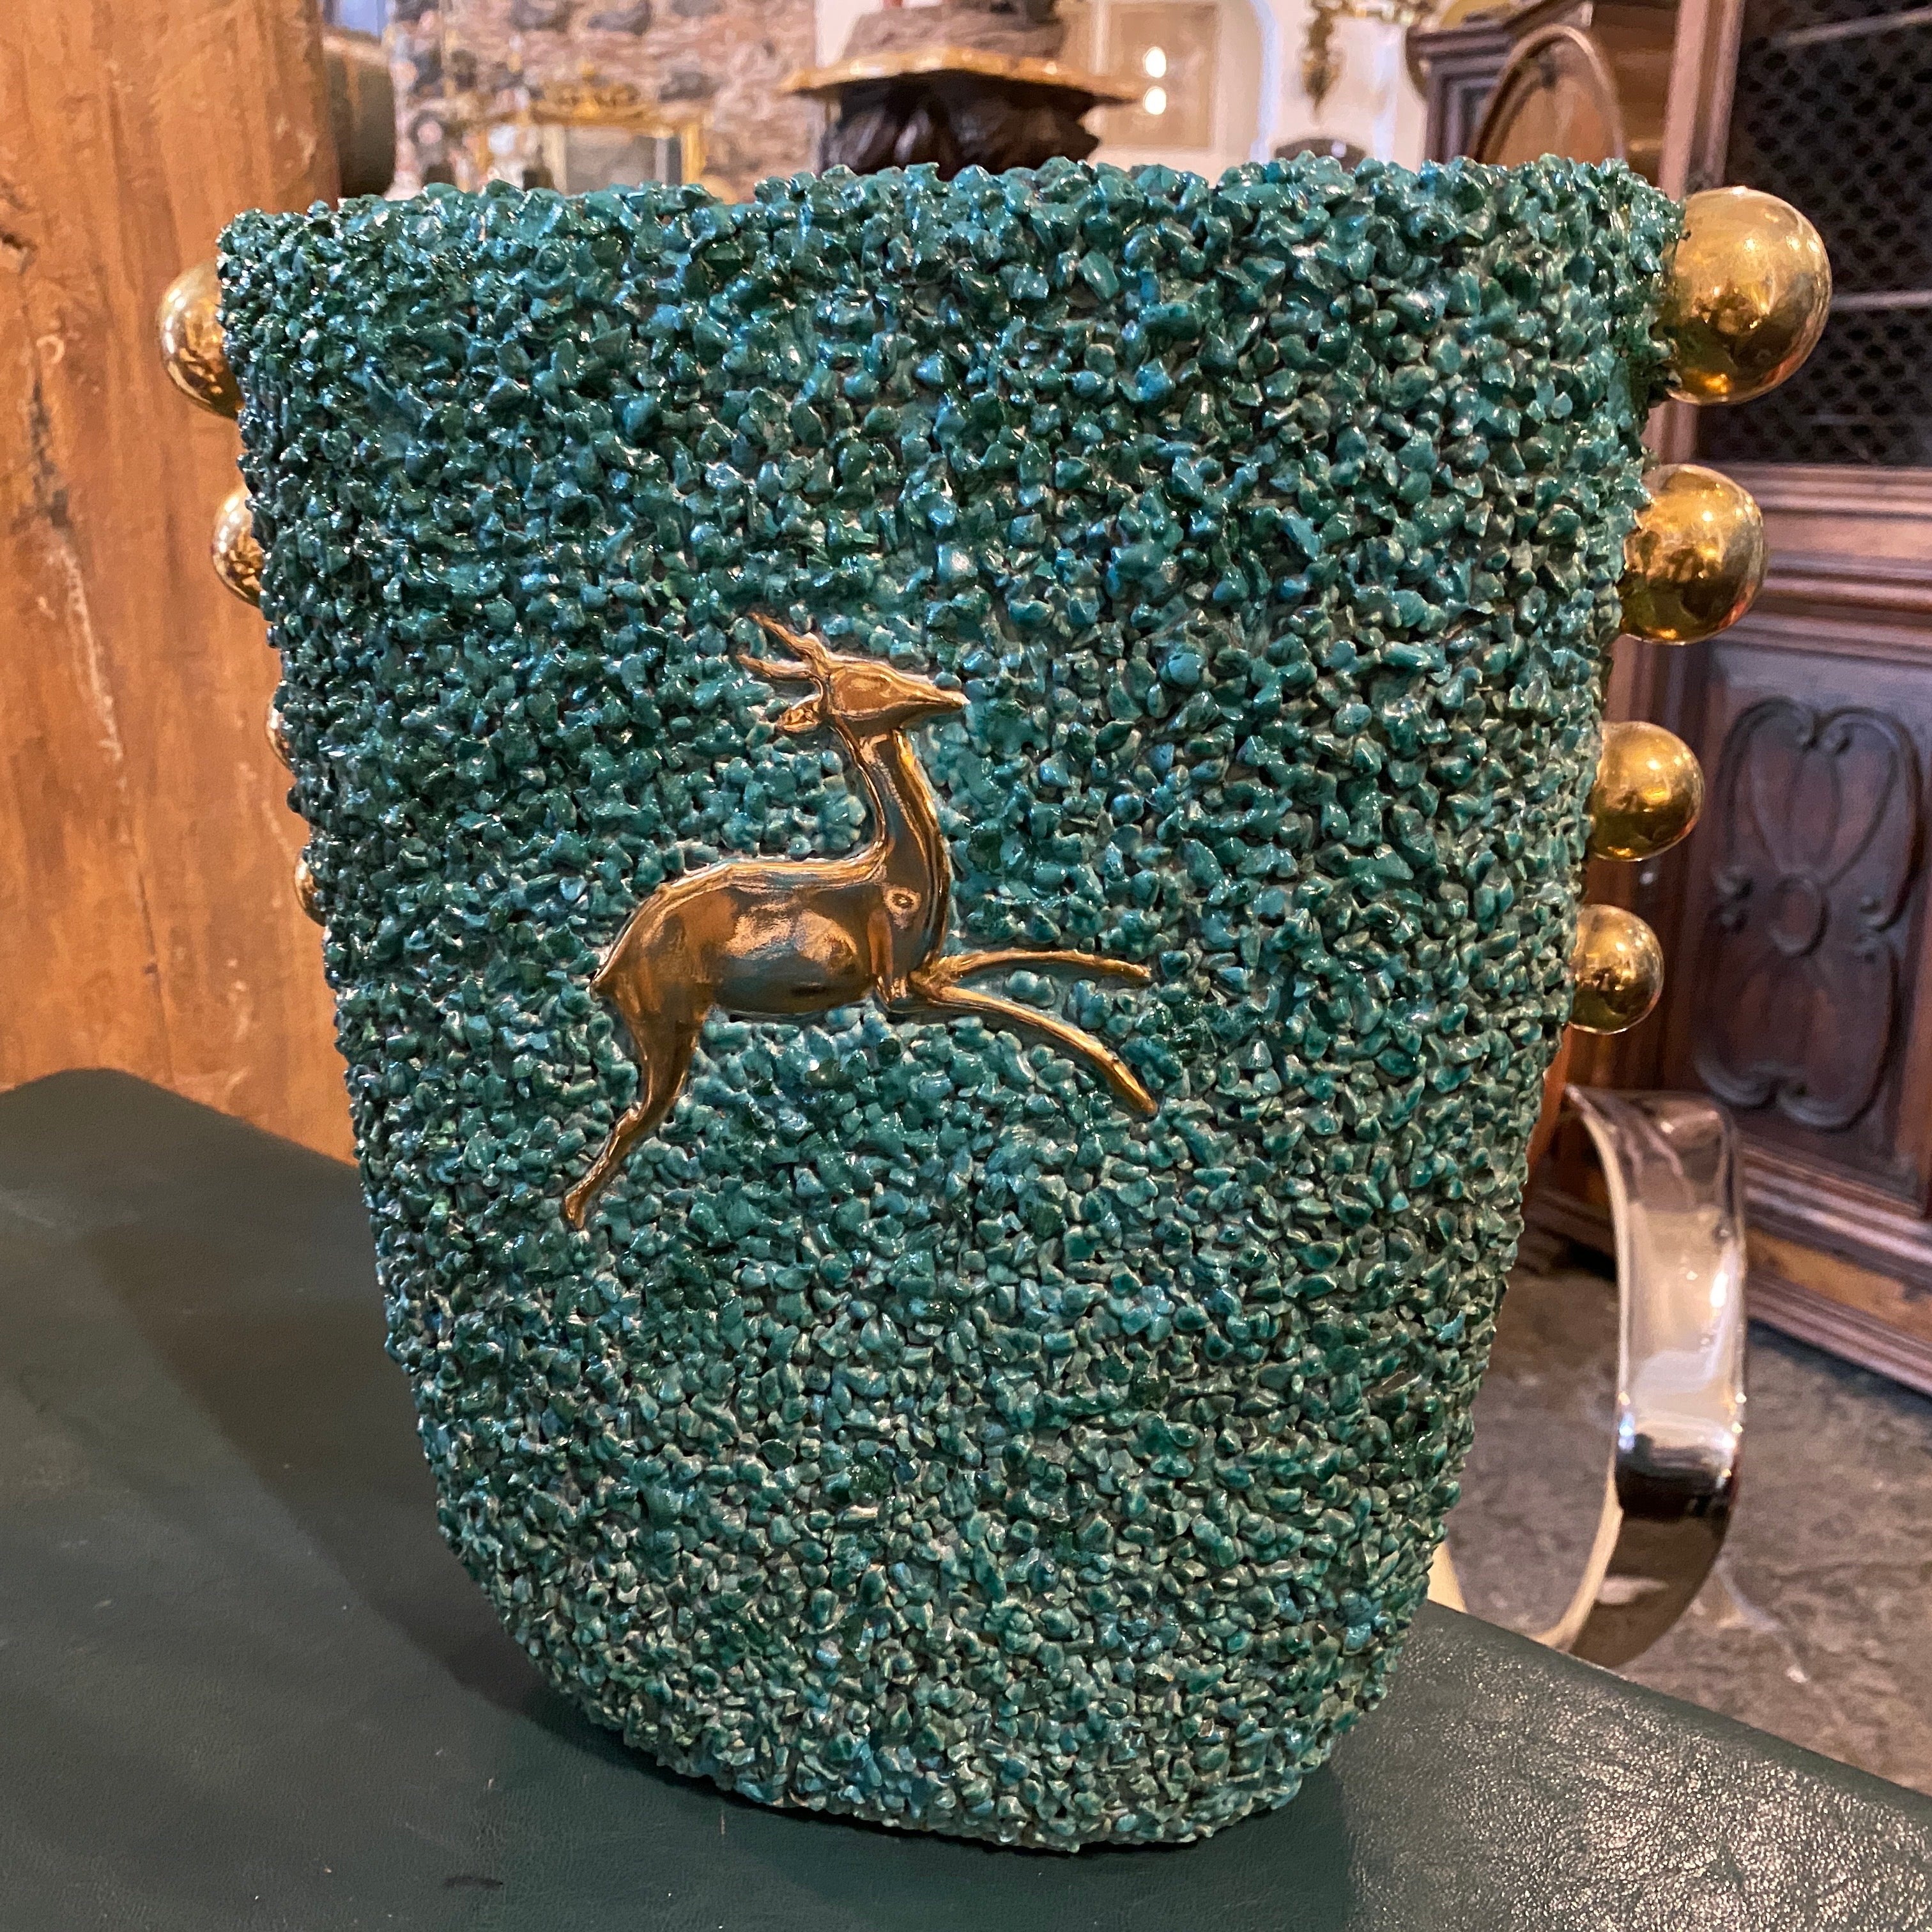 An Art Deco green and gold ceramic vase hand-crafted in Italy 1930s by Gabriele Bicchioni. Lathe forming, semi-matte green glaze on a rough surface obtained with application of grit spheres decorated in gold on the sides. the vase it's in very good